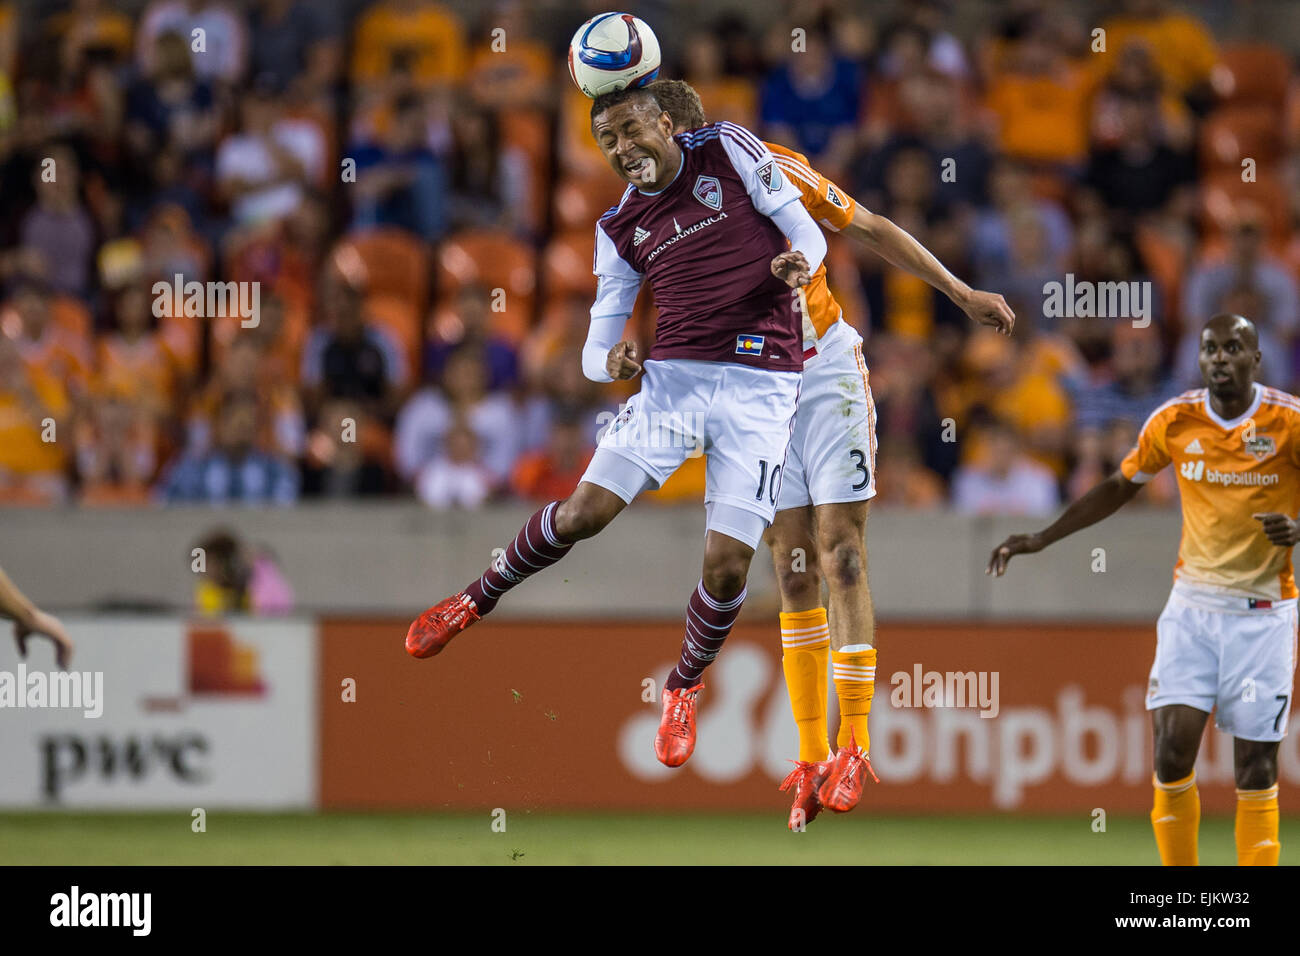 Houston, Texas, USA. 28th Mar, 2015. Colorado Rapids forward Gabriel Torres (10) heads the ball in front of Houston Dynamo midfielder Rob Lovejoy (3) during an MLS game between the Houston Dynamo and the Colorado Rapids at BBVA Compass Stadium in Houston, TX on March 28th, 2015. The game ended in a 0-0 draw. Credit:  Trask Smith/ZUMA Wire/Alamy Live News Stock Photo